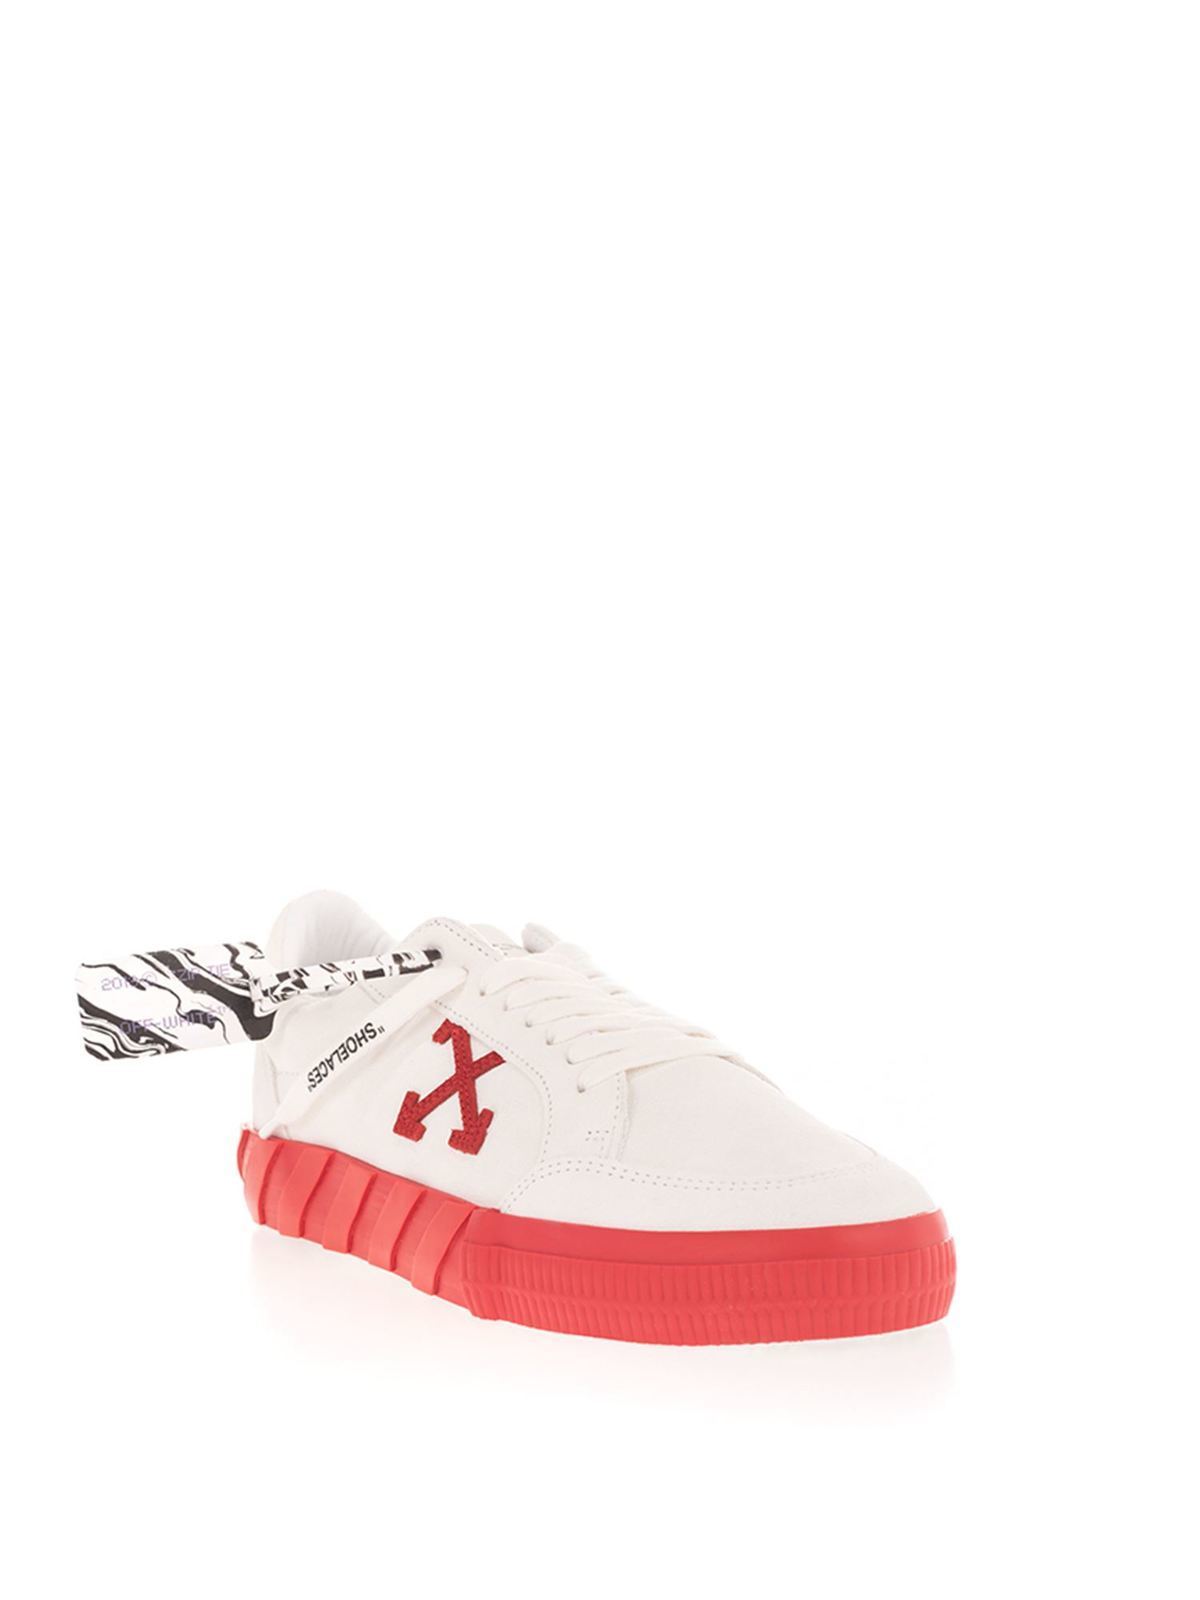 sæt ind Flyvningen Ødelægge Trainers Off-White - Low Vulcanized sneakers in white - OMIA085F20LEA0050125